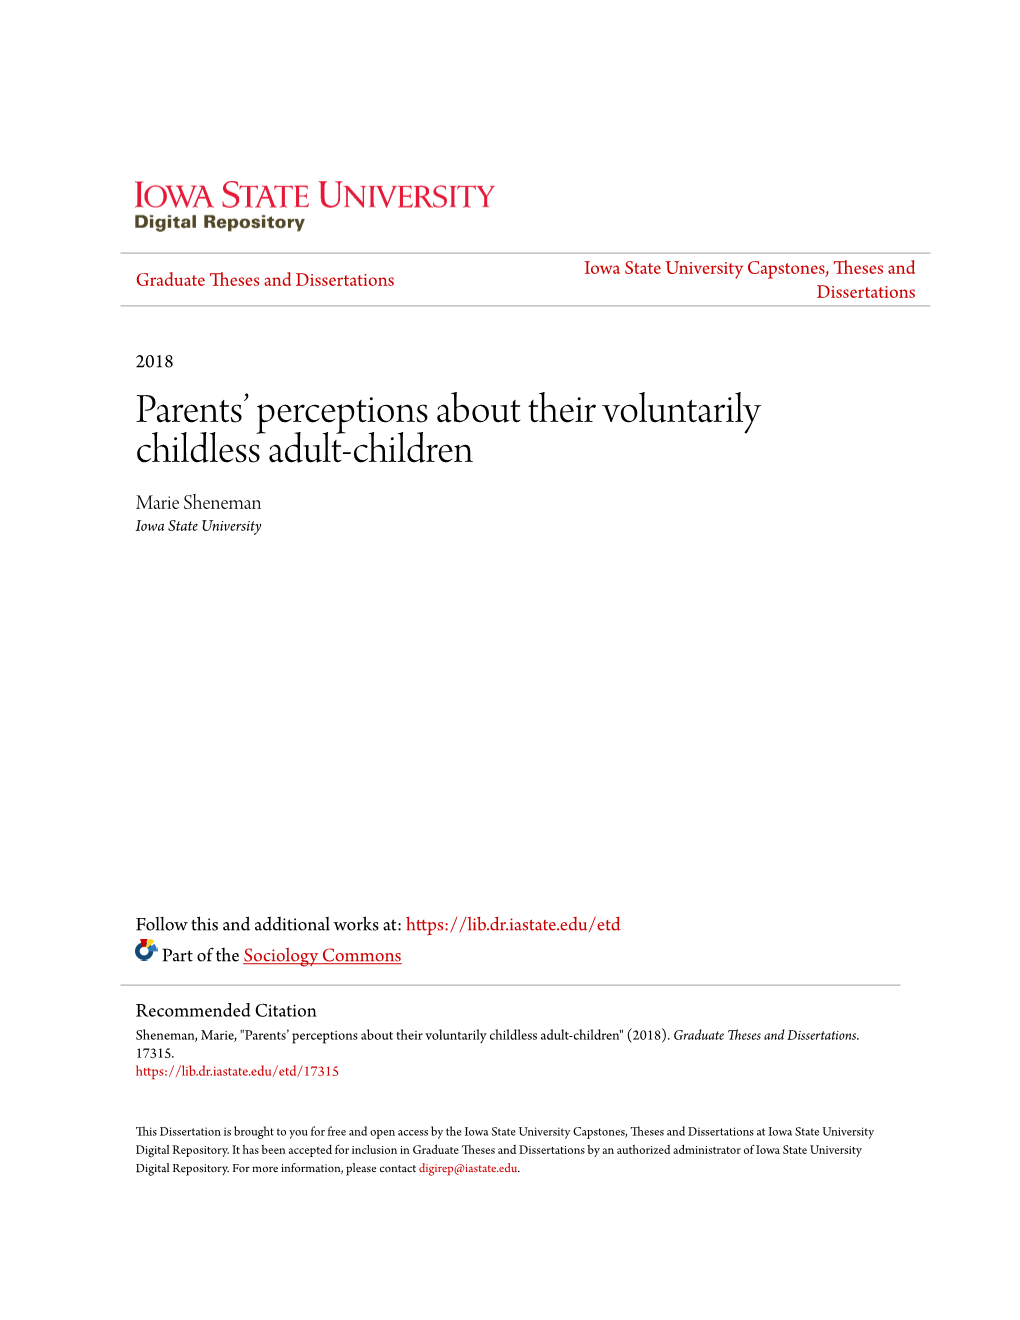 Parents' Perceptions About Their Voluntarily Childless Adult-Children